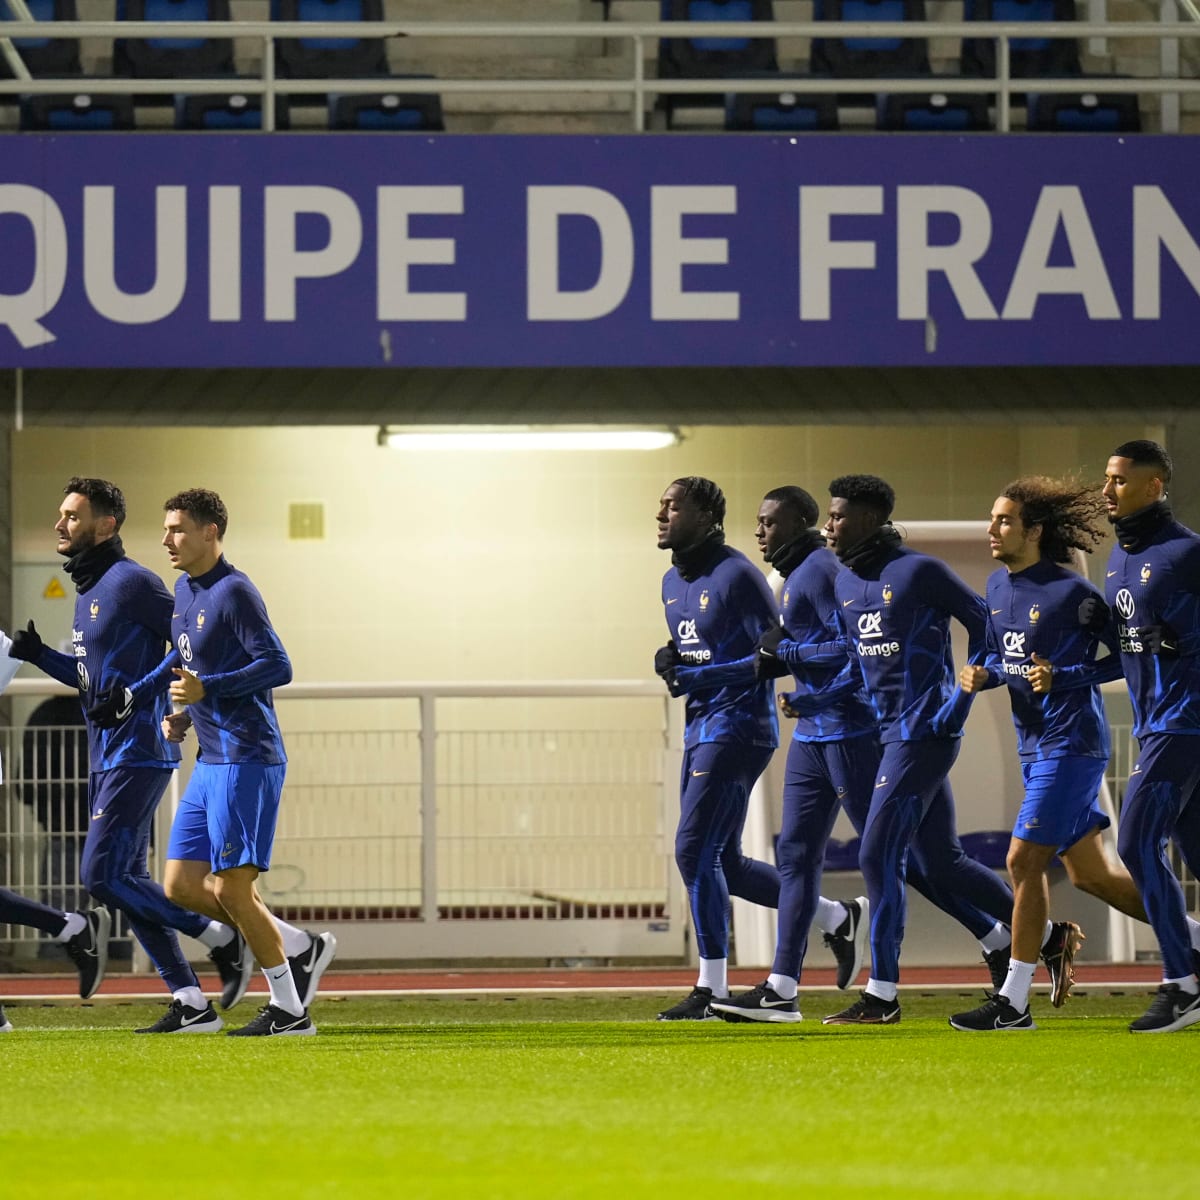 Watch France vs Greece Stream UEFA Euro qualifying live, channel - How to Watch and Stream Major League and College Sports